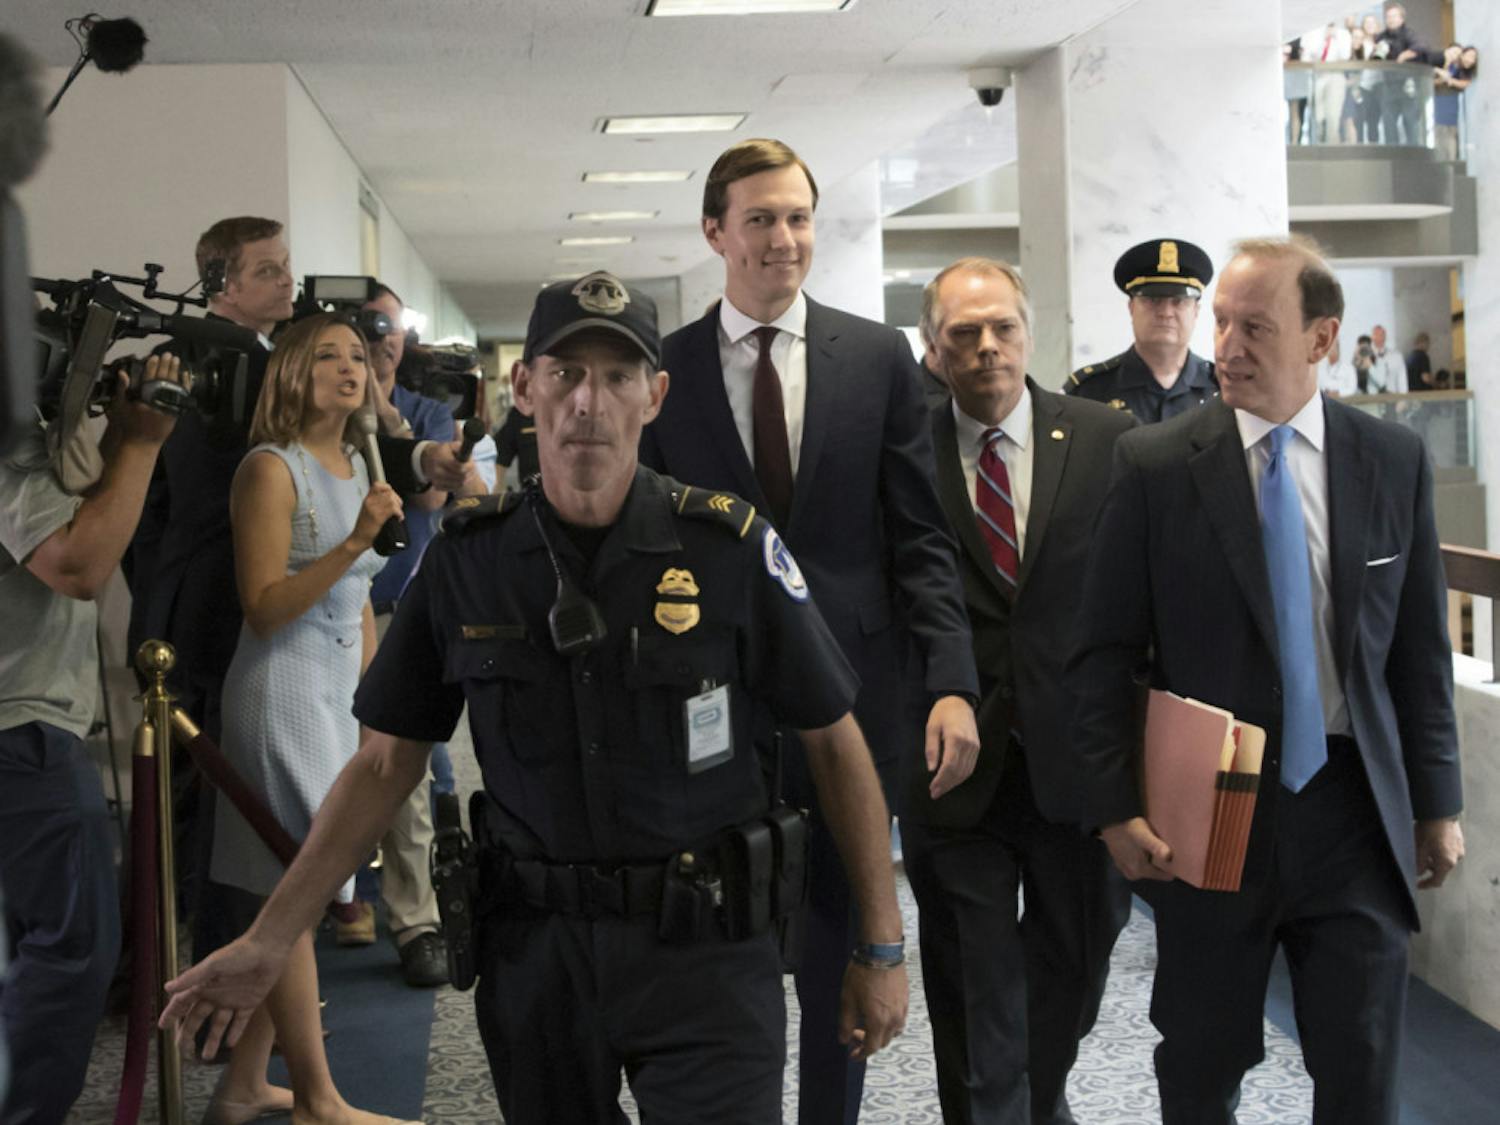 White House senior adviser Jared Kushner, center, accompanied by his attorney Abbe Lowell, right, arrives on Capitol Hill in Washington., Monday, July 24, 2017, to meet behind closed doors before the Senate Intelligence Committee on the investigation into possible collusion between Russian officials and the Trump campaign. (AP Photo/J. Scott Applewhite